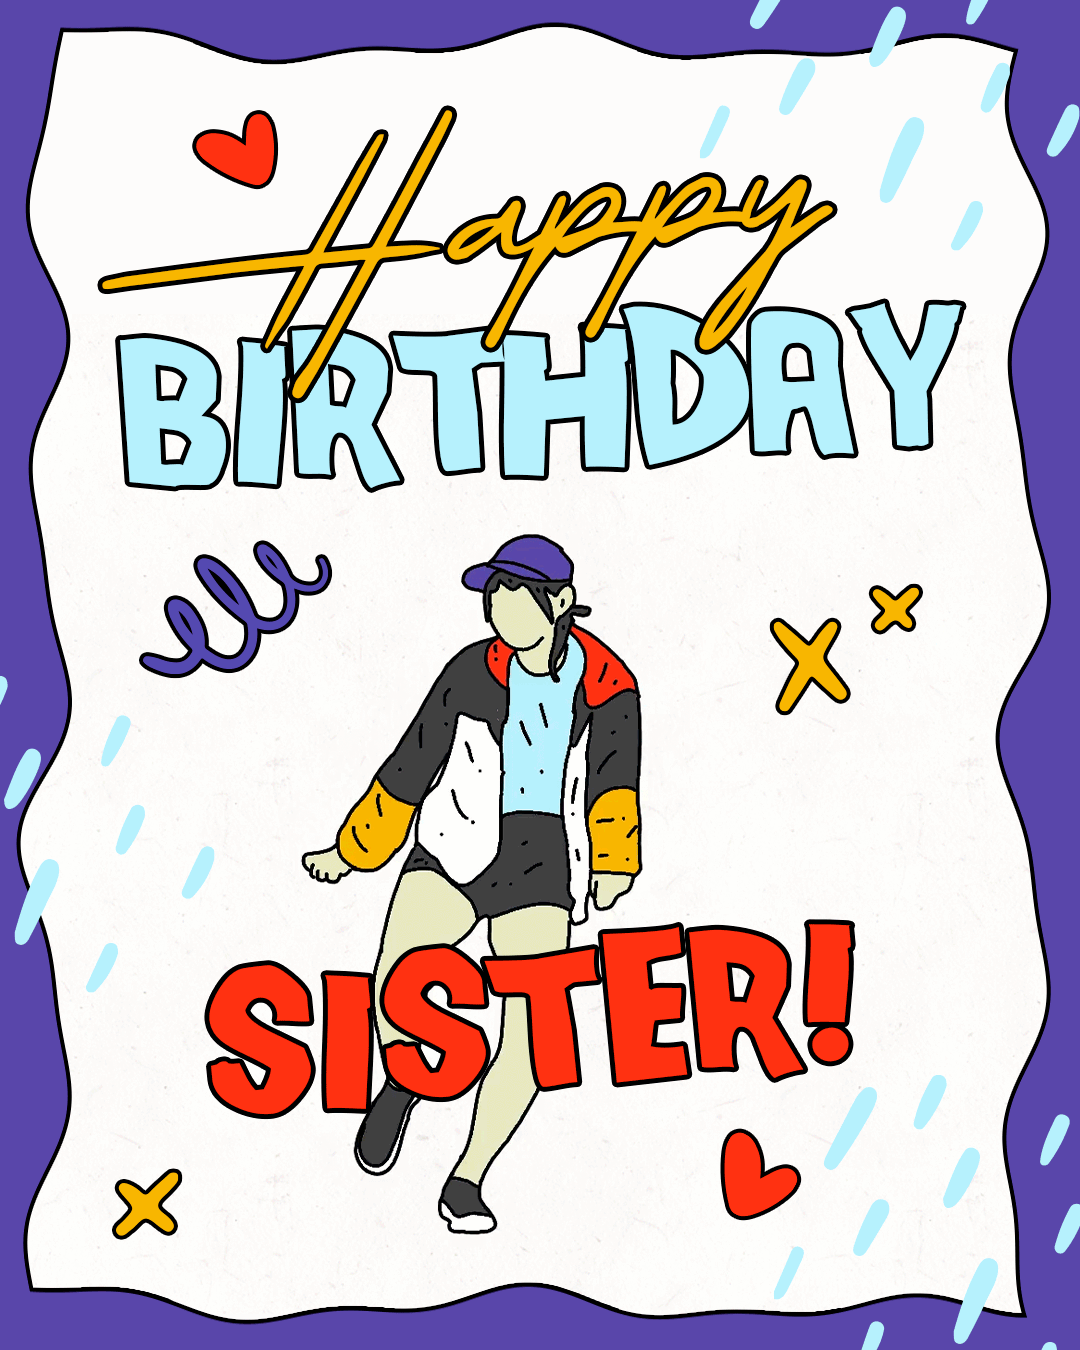 animated birthday greetings for sister